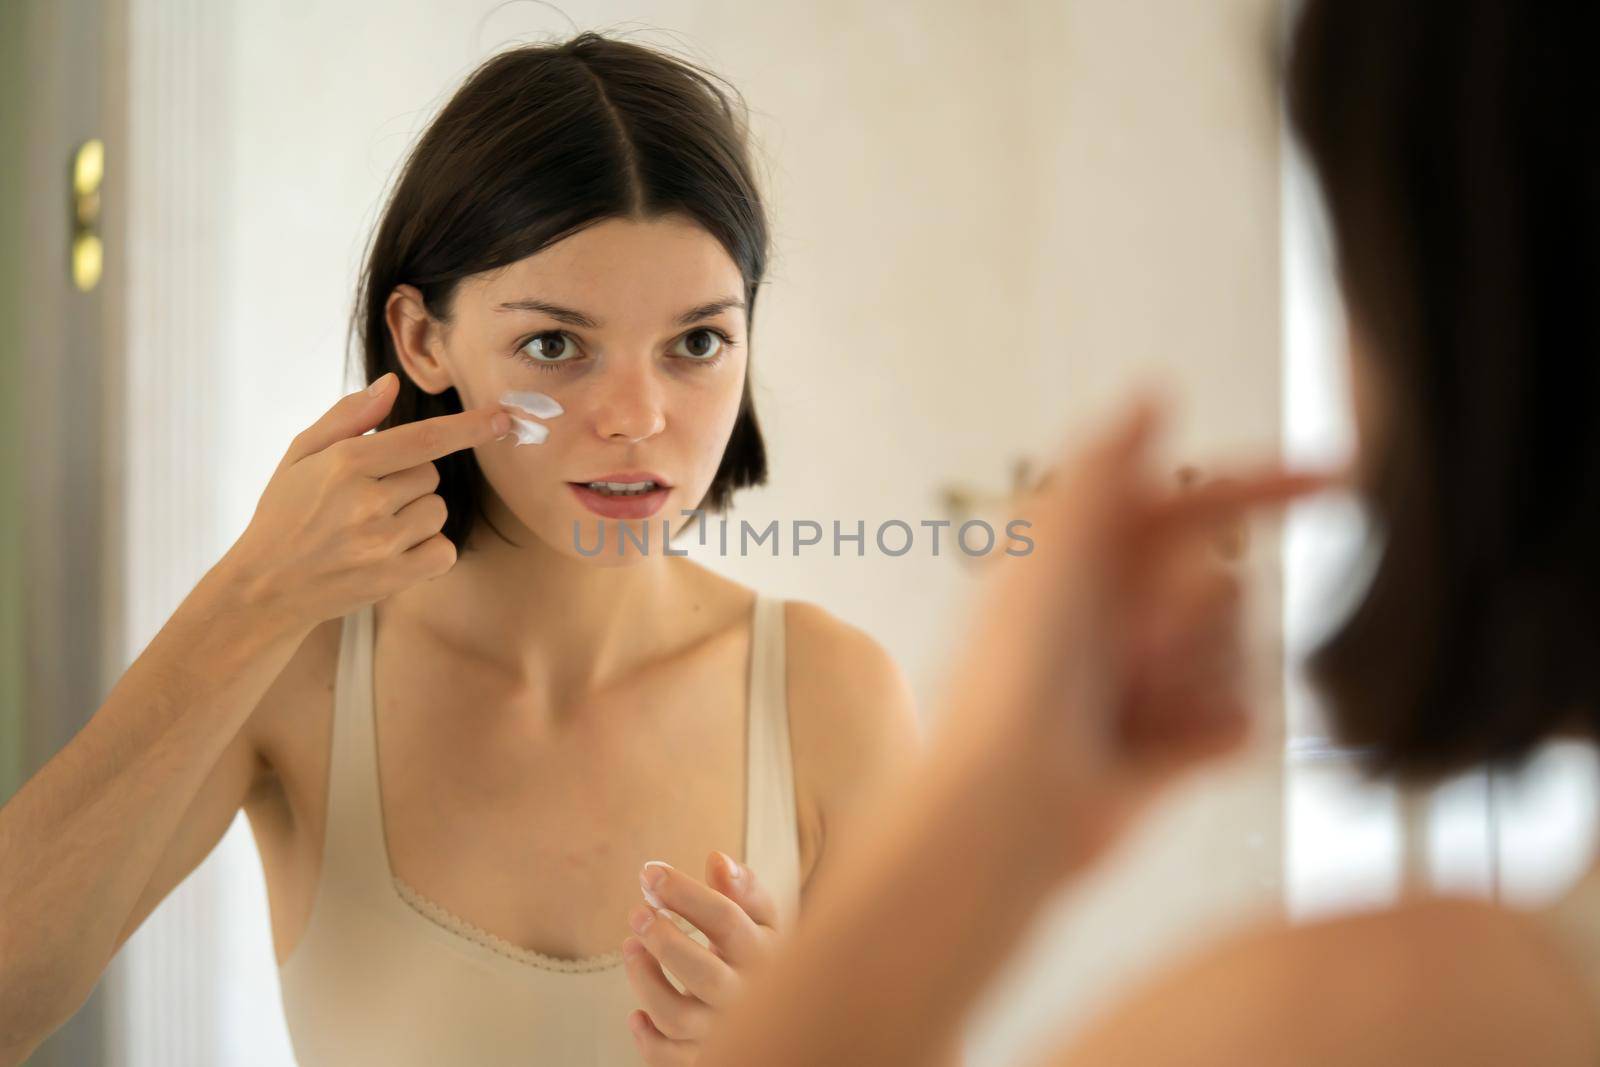 A young pretty girl applies cream stripes on the cheeks, declaring war on dry skin and acne. A woman takes care of the health and hydration of her skin in the bathroom near the mirror.